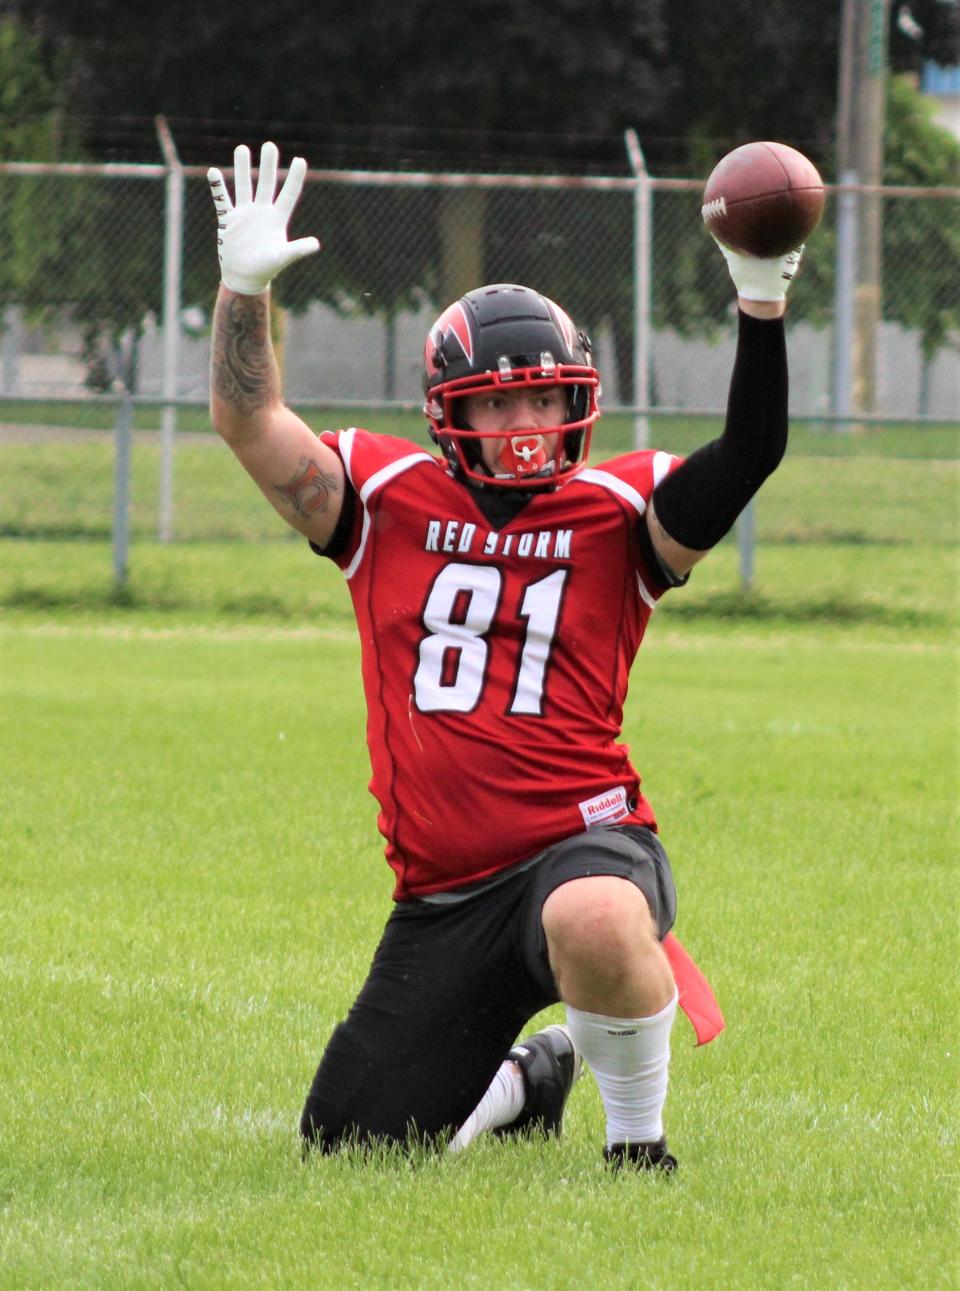 Southeast Michigan Red Storm tight end Tyler Hammack calls out that he made the catch before it hit the grass against the West Michigan Patriots on Saturday, June 11, 2022. Referees called the play incomplete.